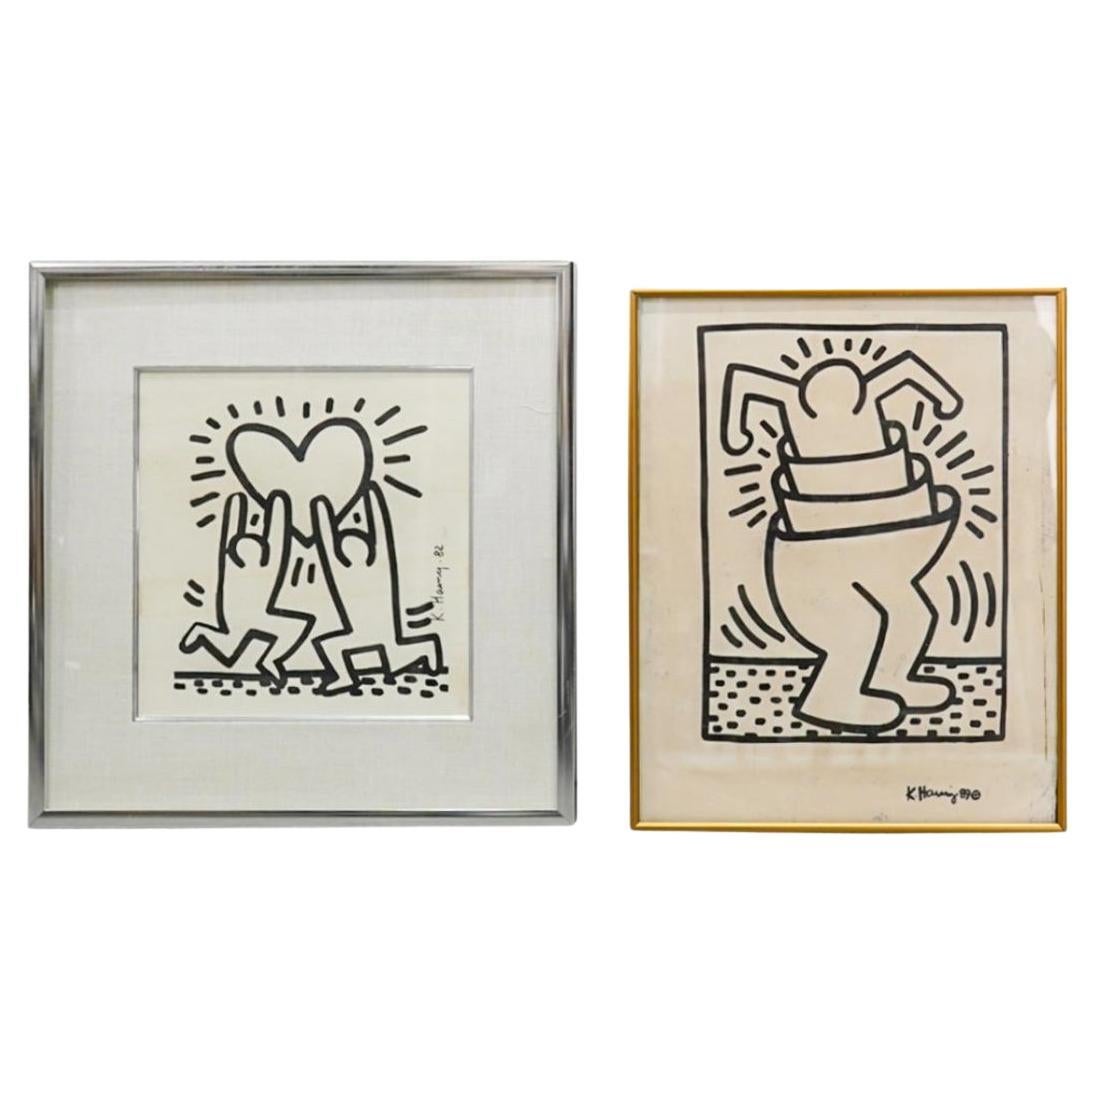 Pair Of Keith Haring Screen Prints on Paper, Signed  For Sale